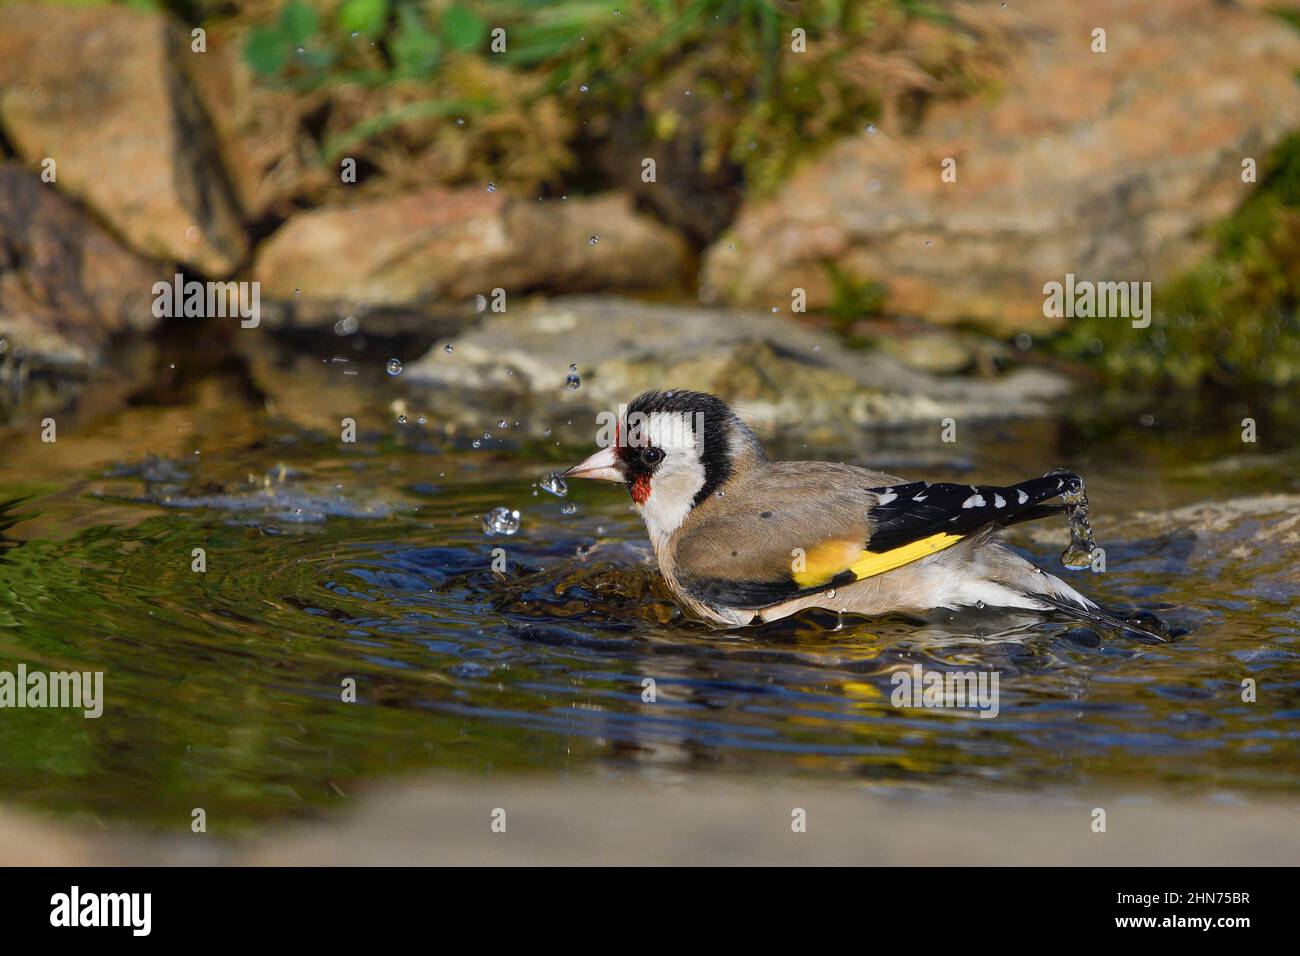 Close-up of a goldfinch bathing in a river Stock Photo